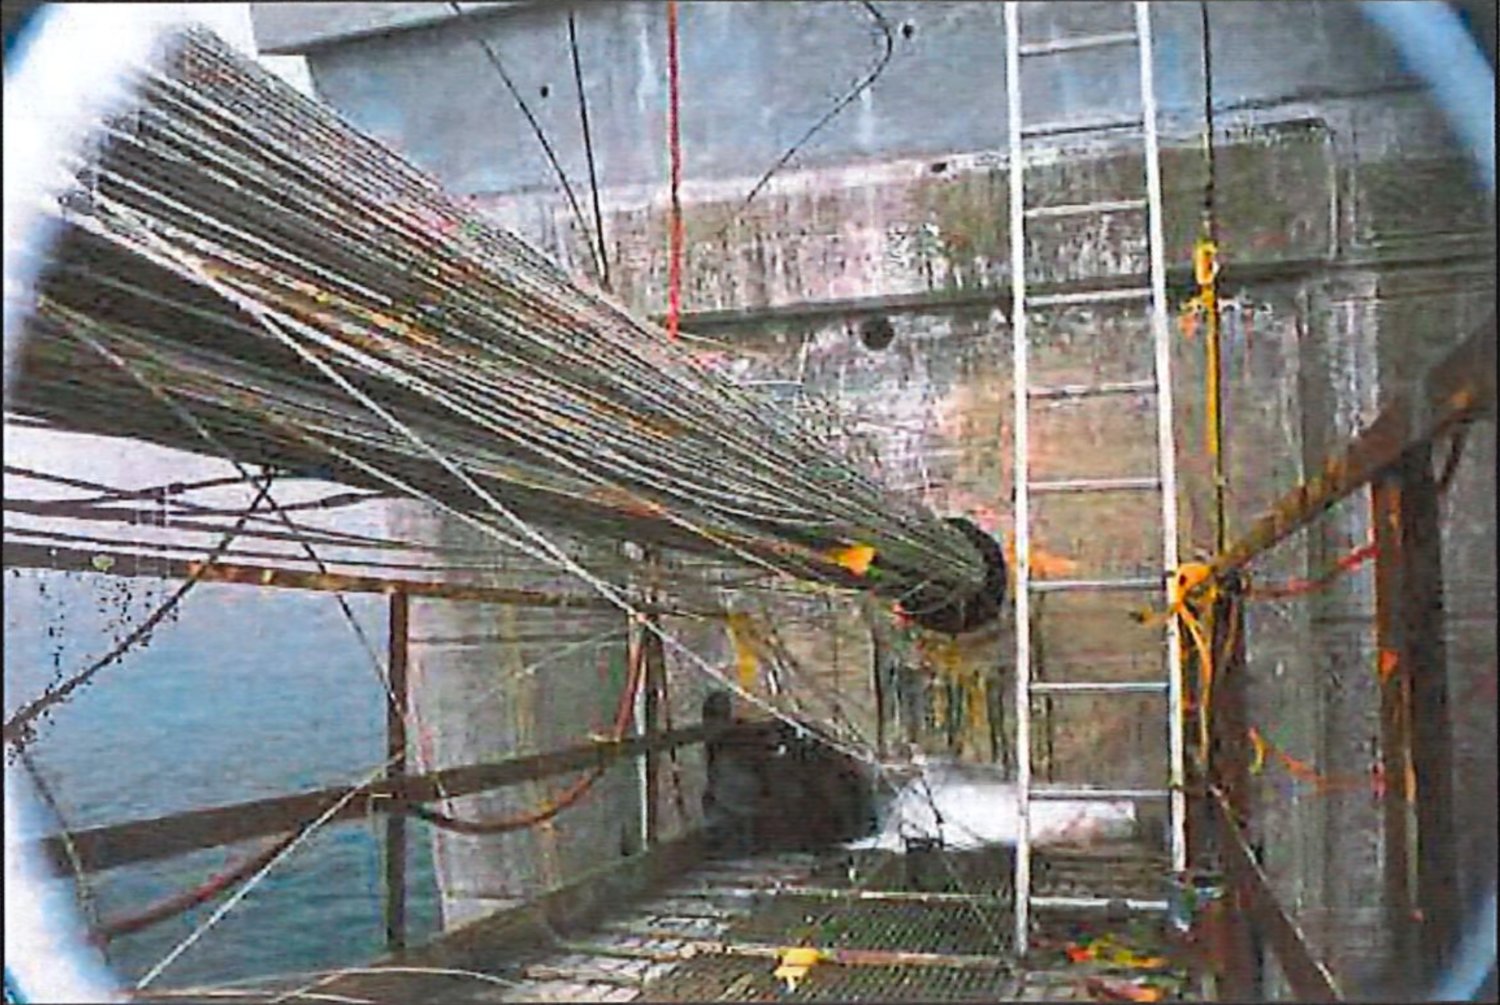 Photo shows wire breaks inside the main cables on the Mt. Hope Bridge. The R.I. Turnpike and Bridge Authority plans to apply a dehumidification project intended to restore the cables’ strength.